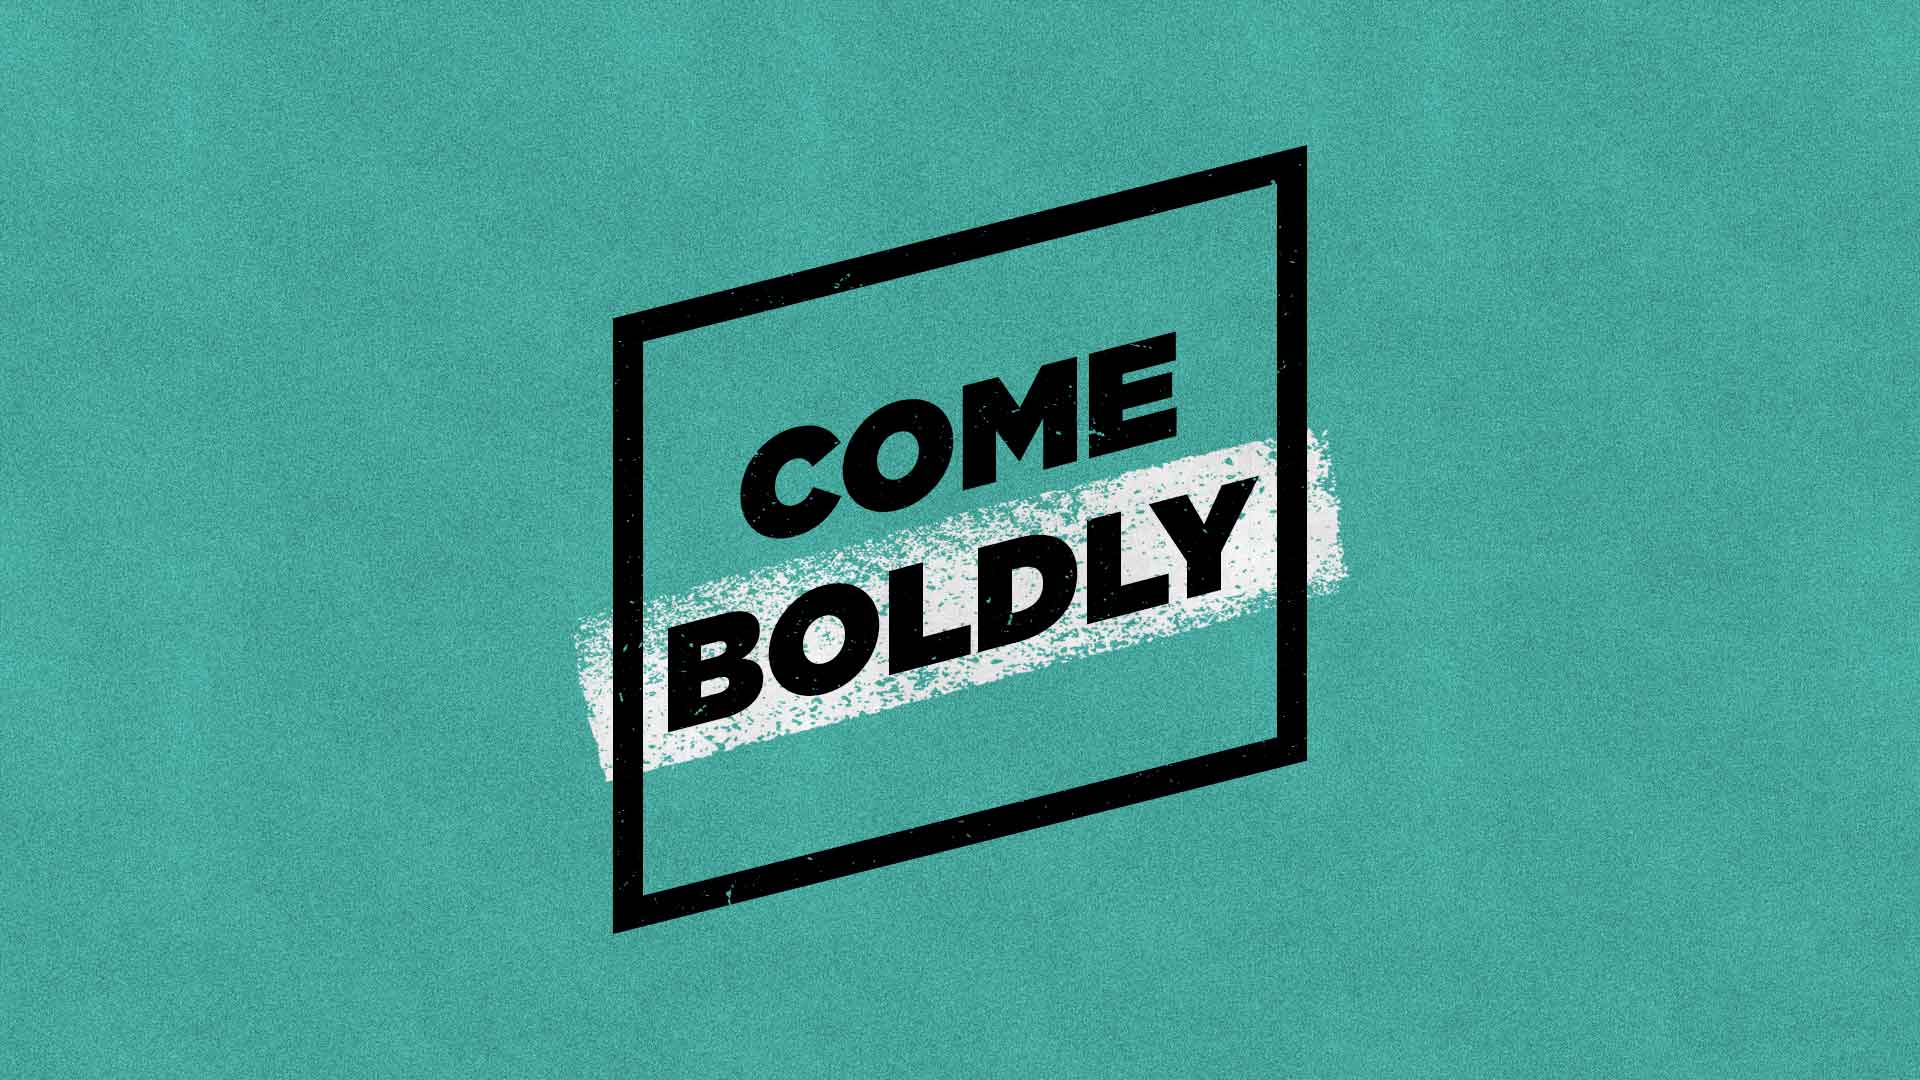 In weakness, come boldly